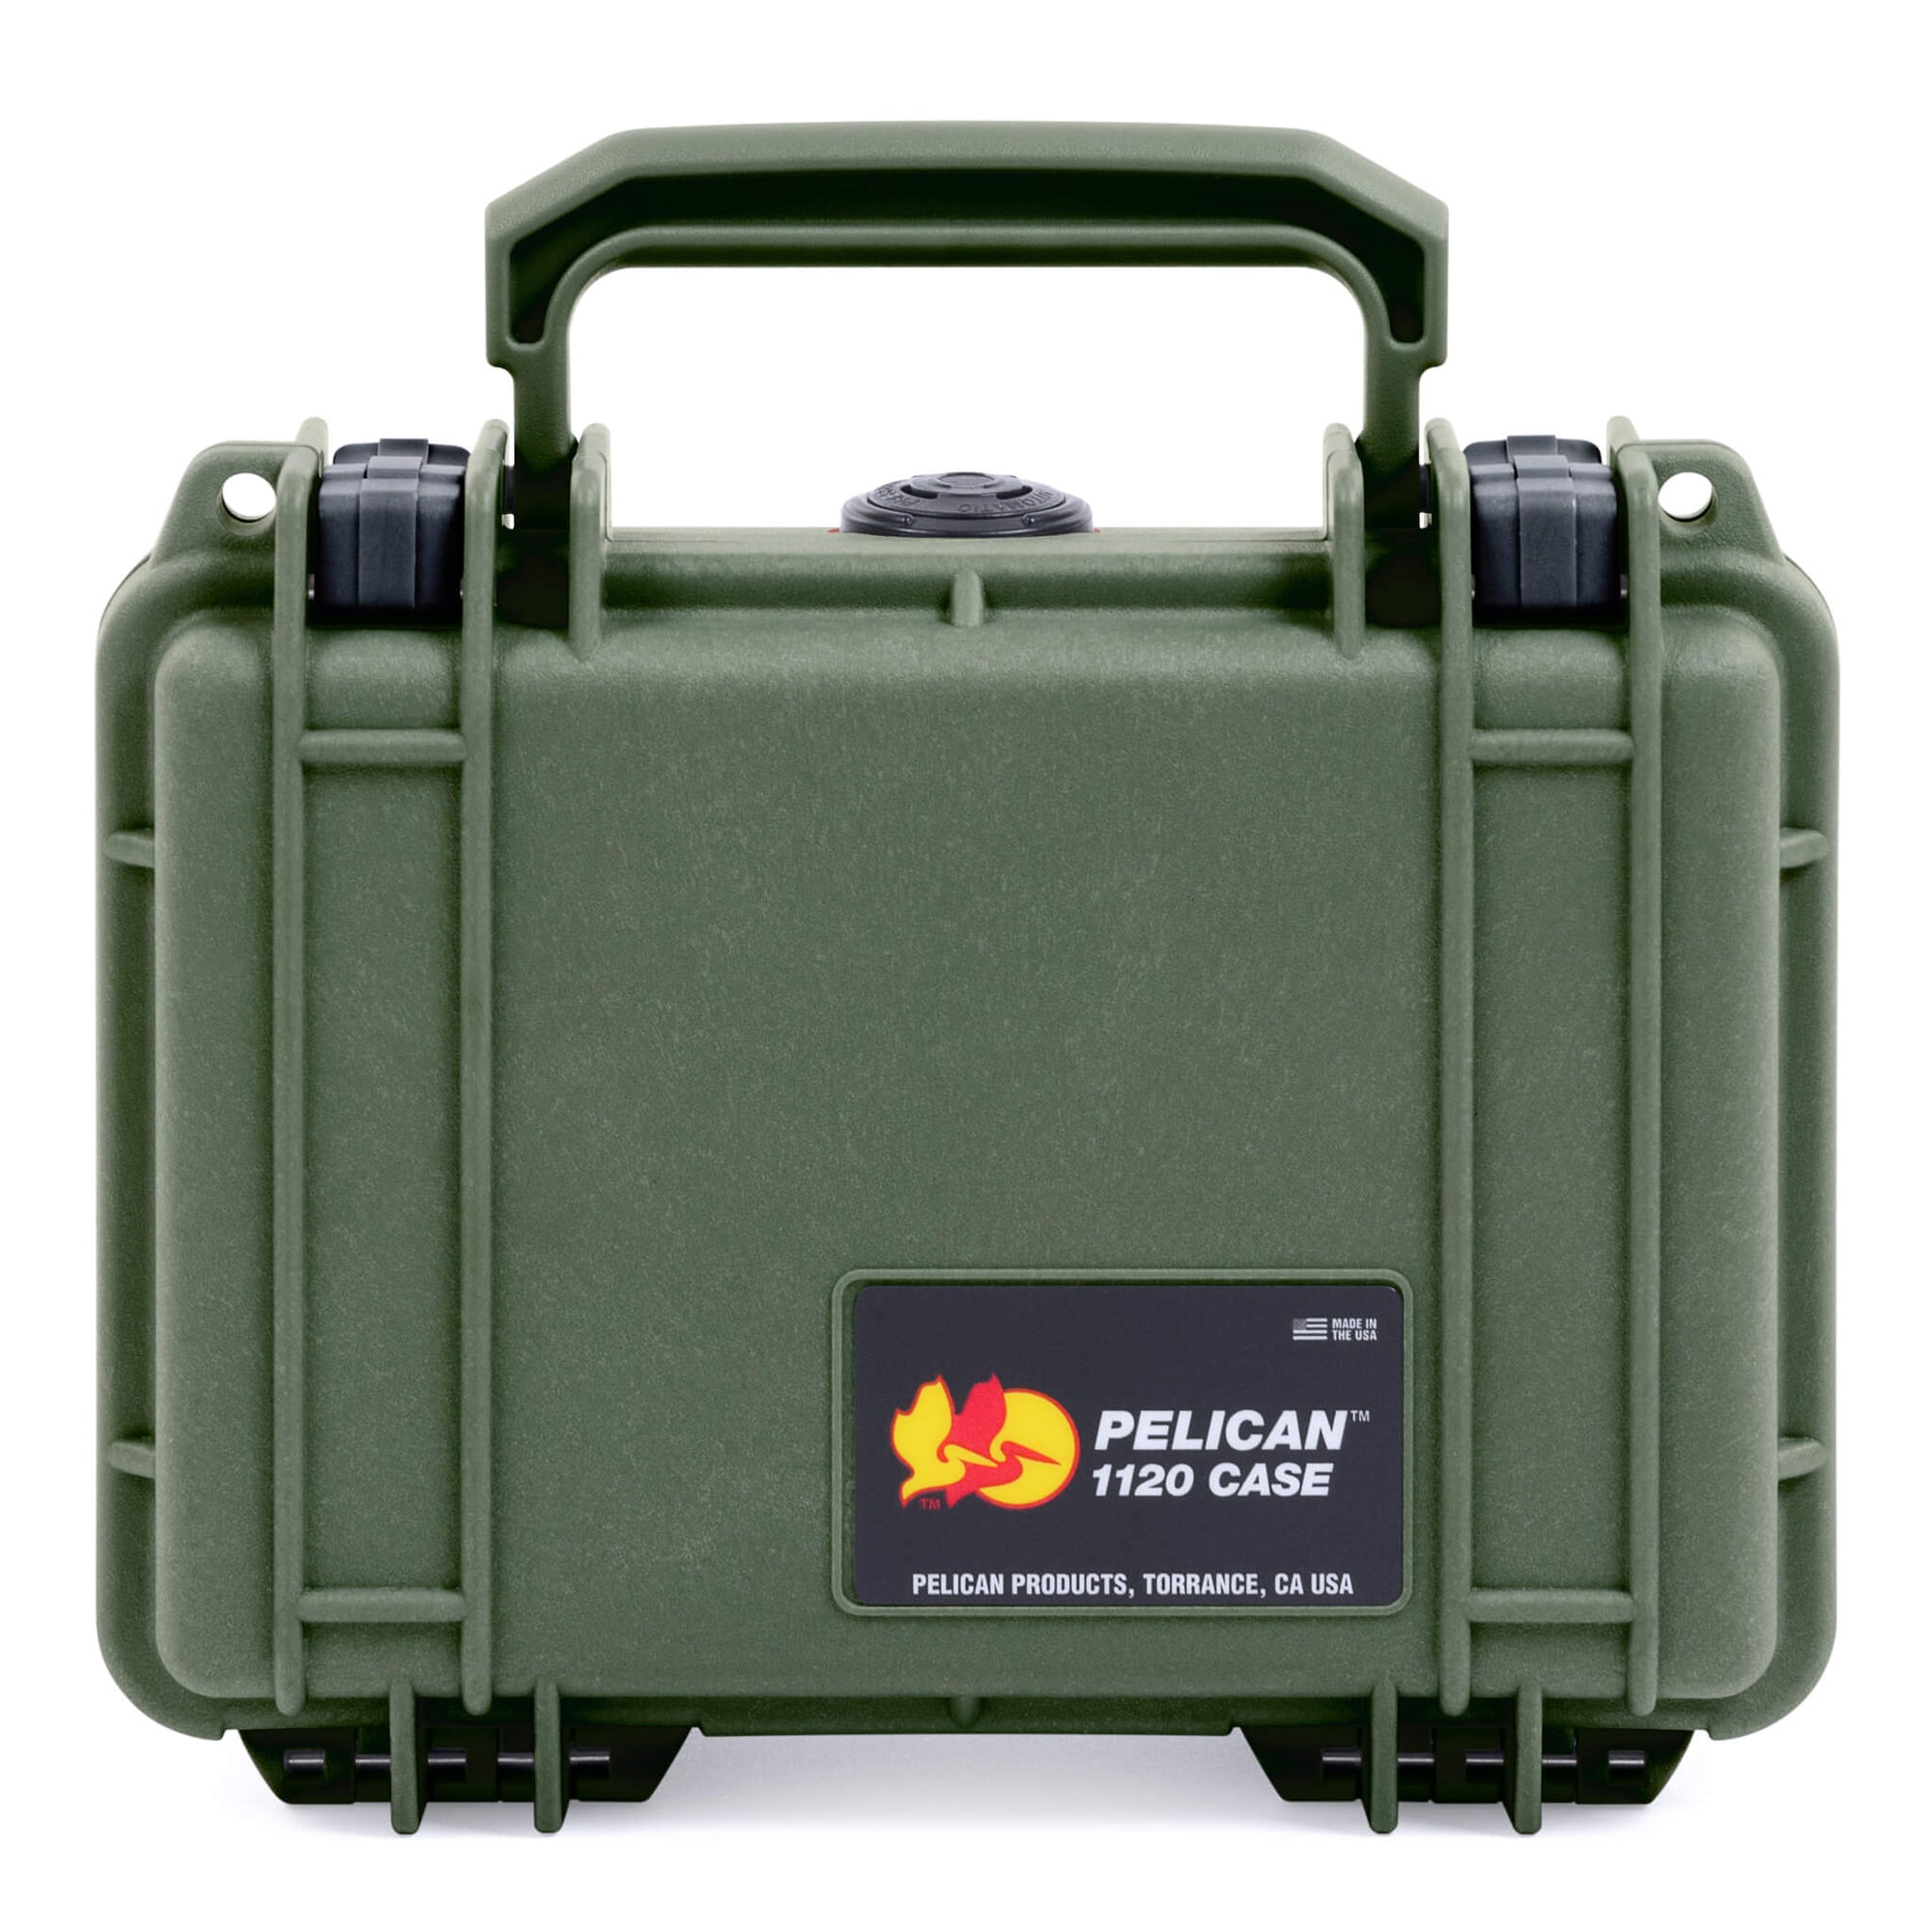 Pelican 1120 Case, OD Green with Black Latches ColorCase 